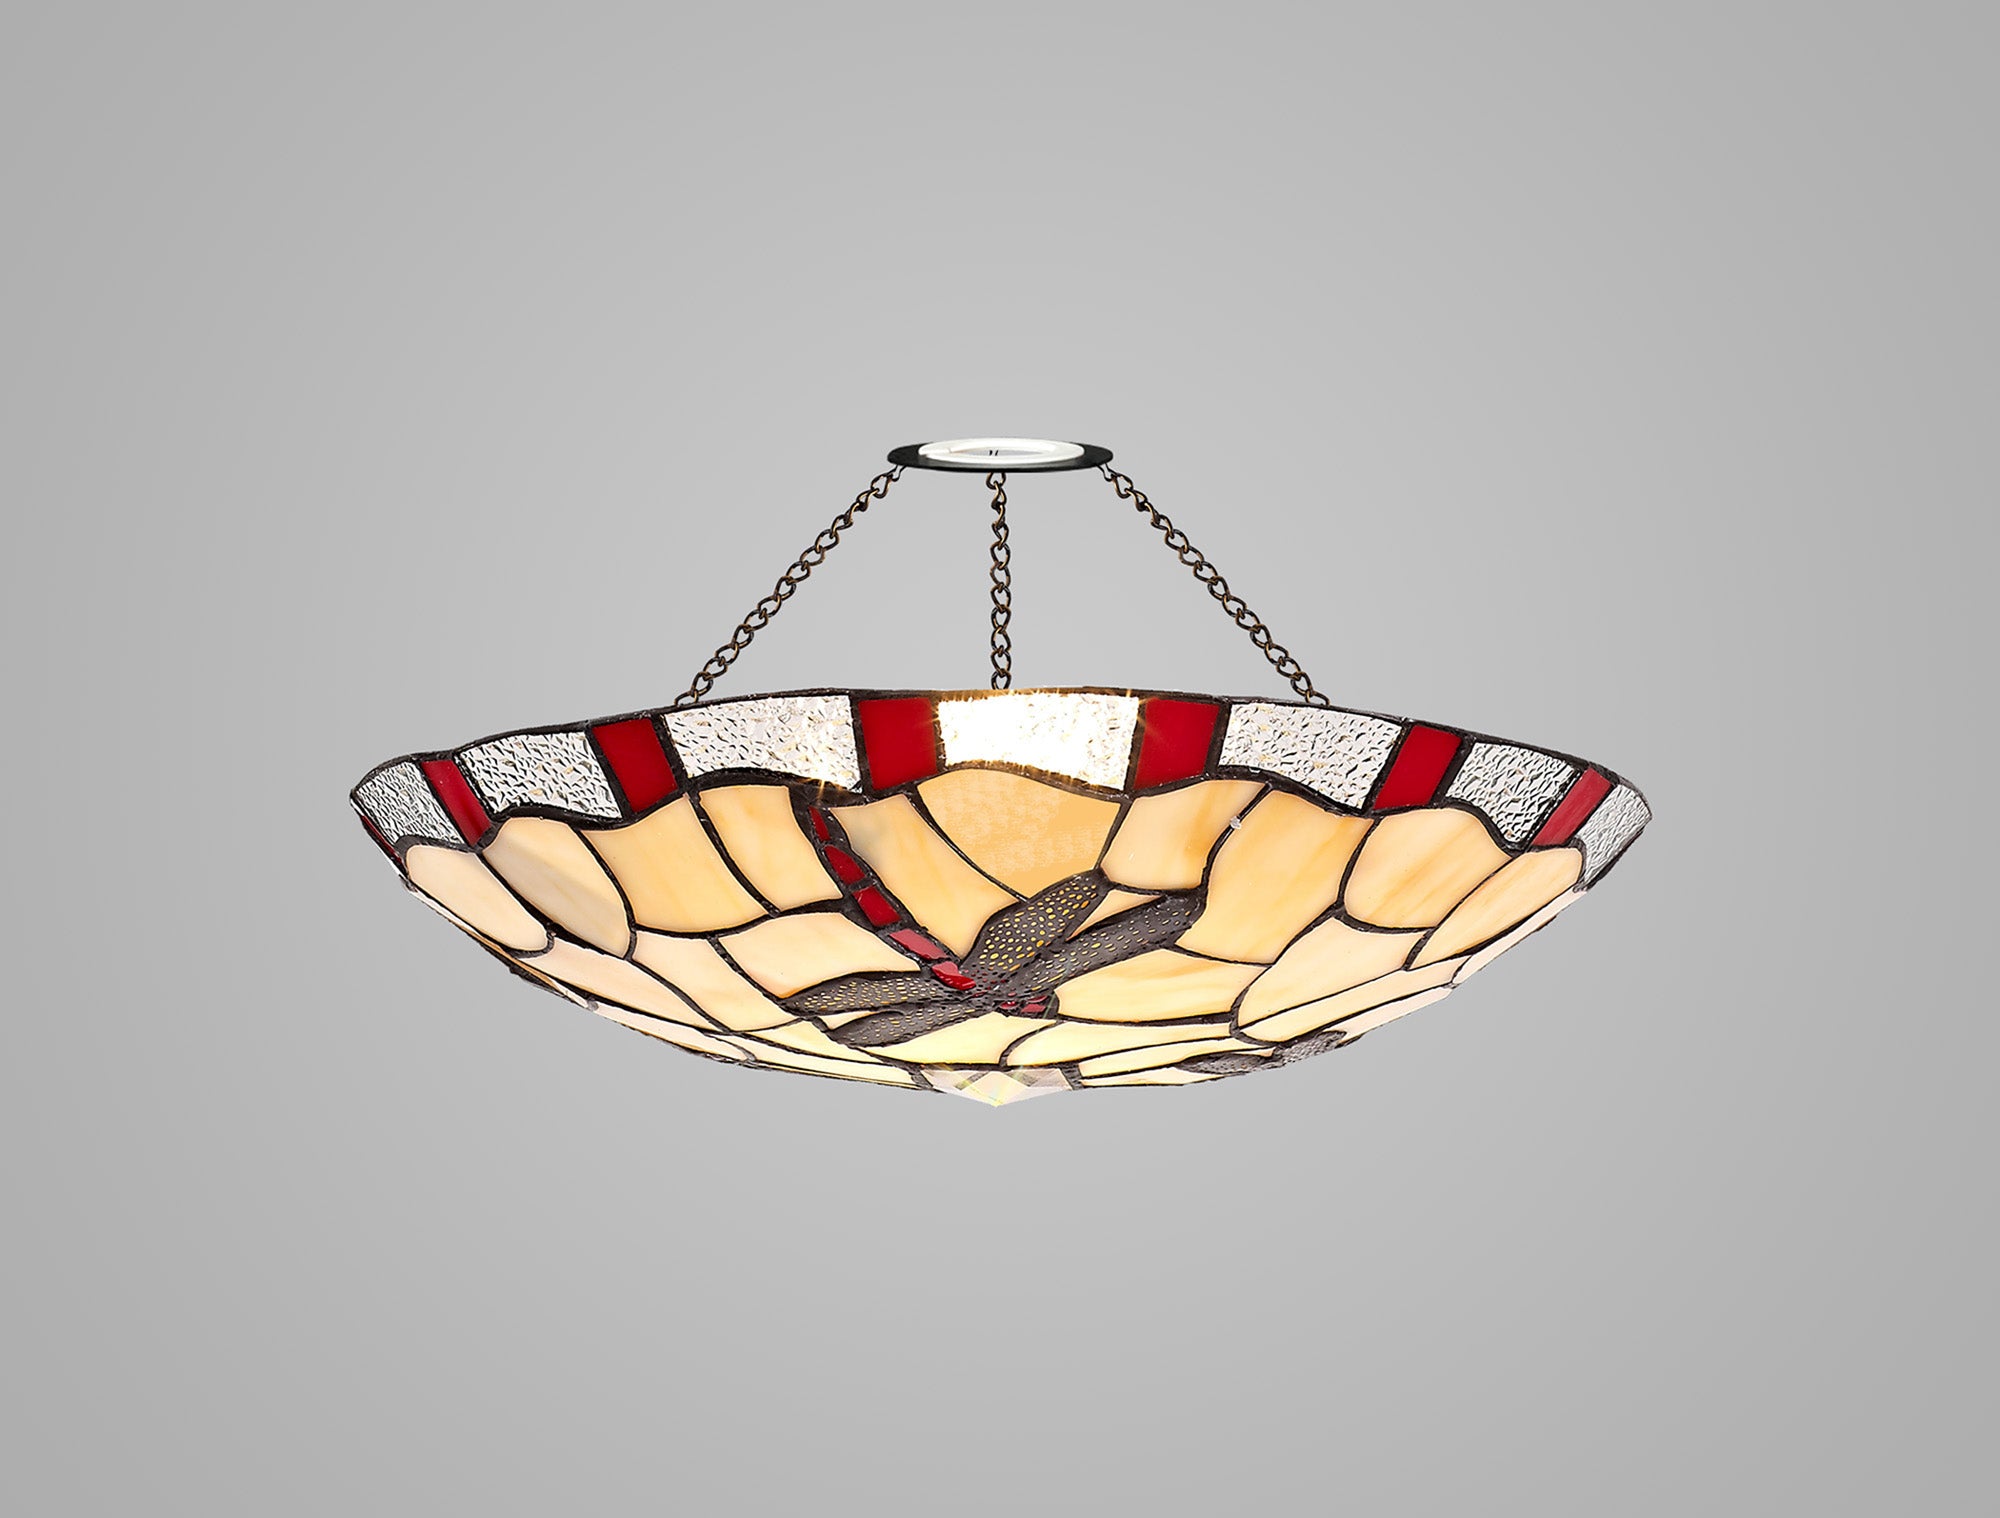 Adena 35cm Tiffany Non-electric Uplighter Shade, Red/Crealm/Clear Crystal